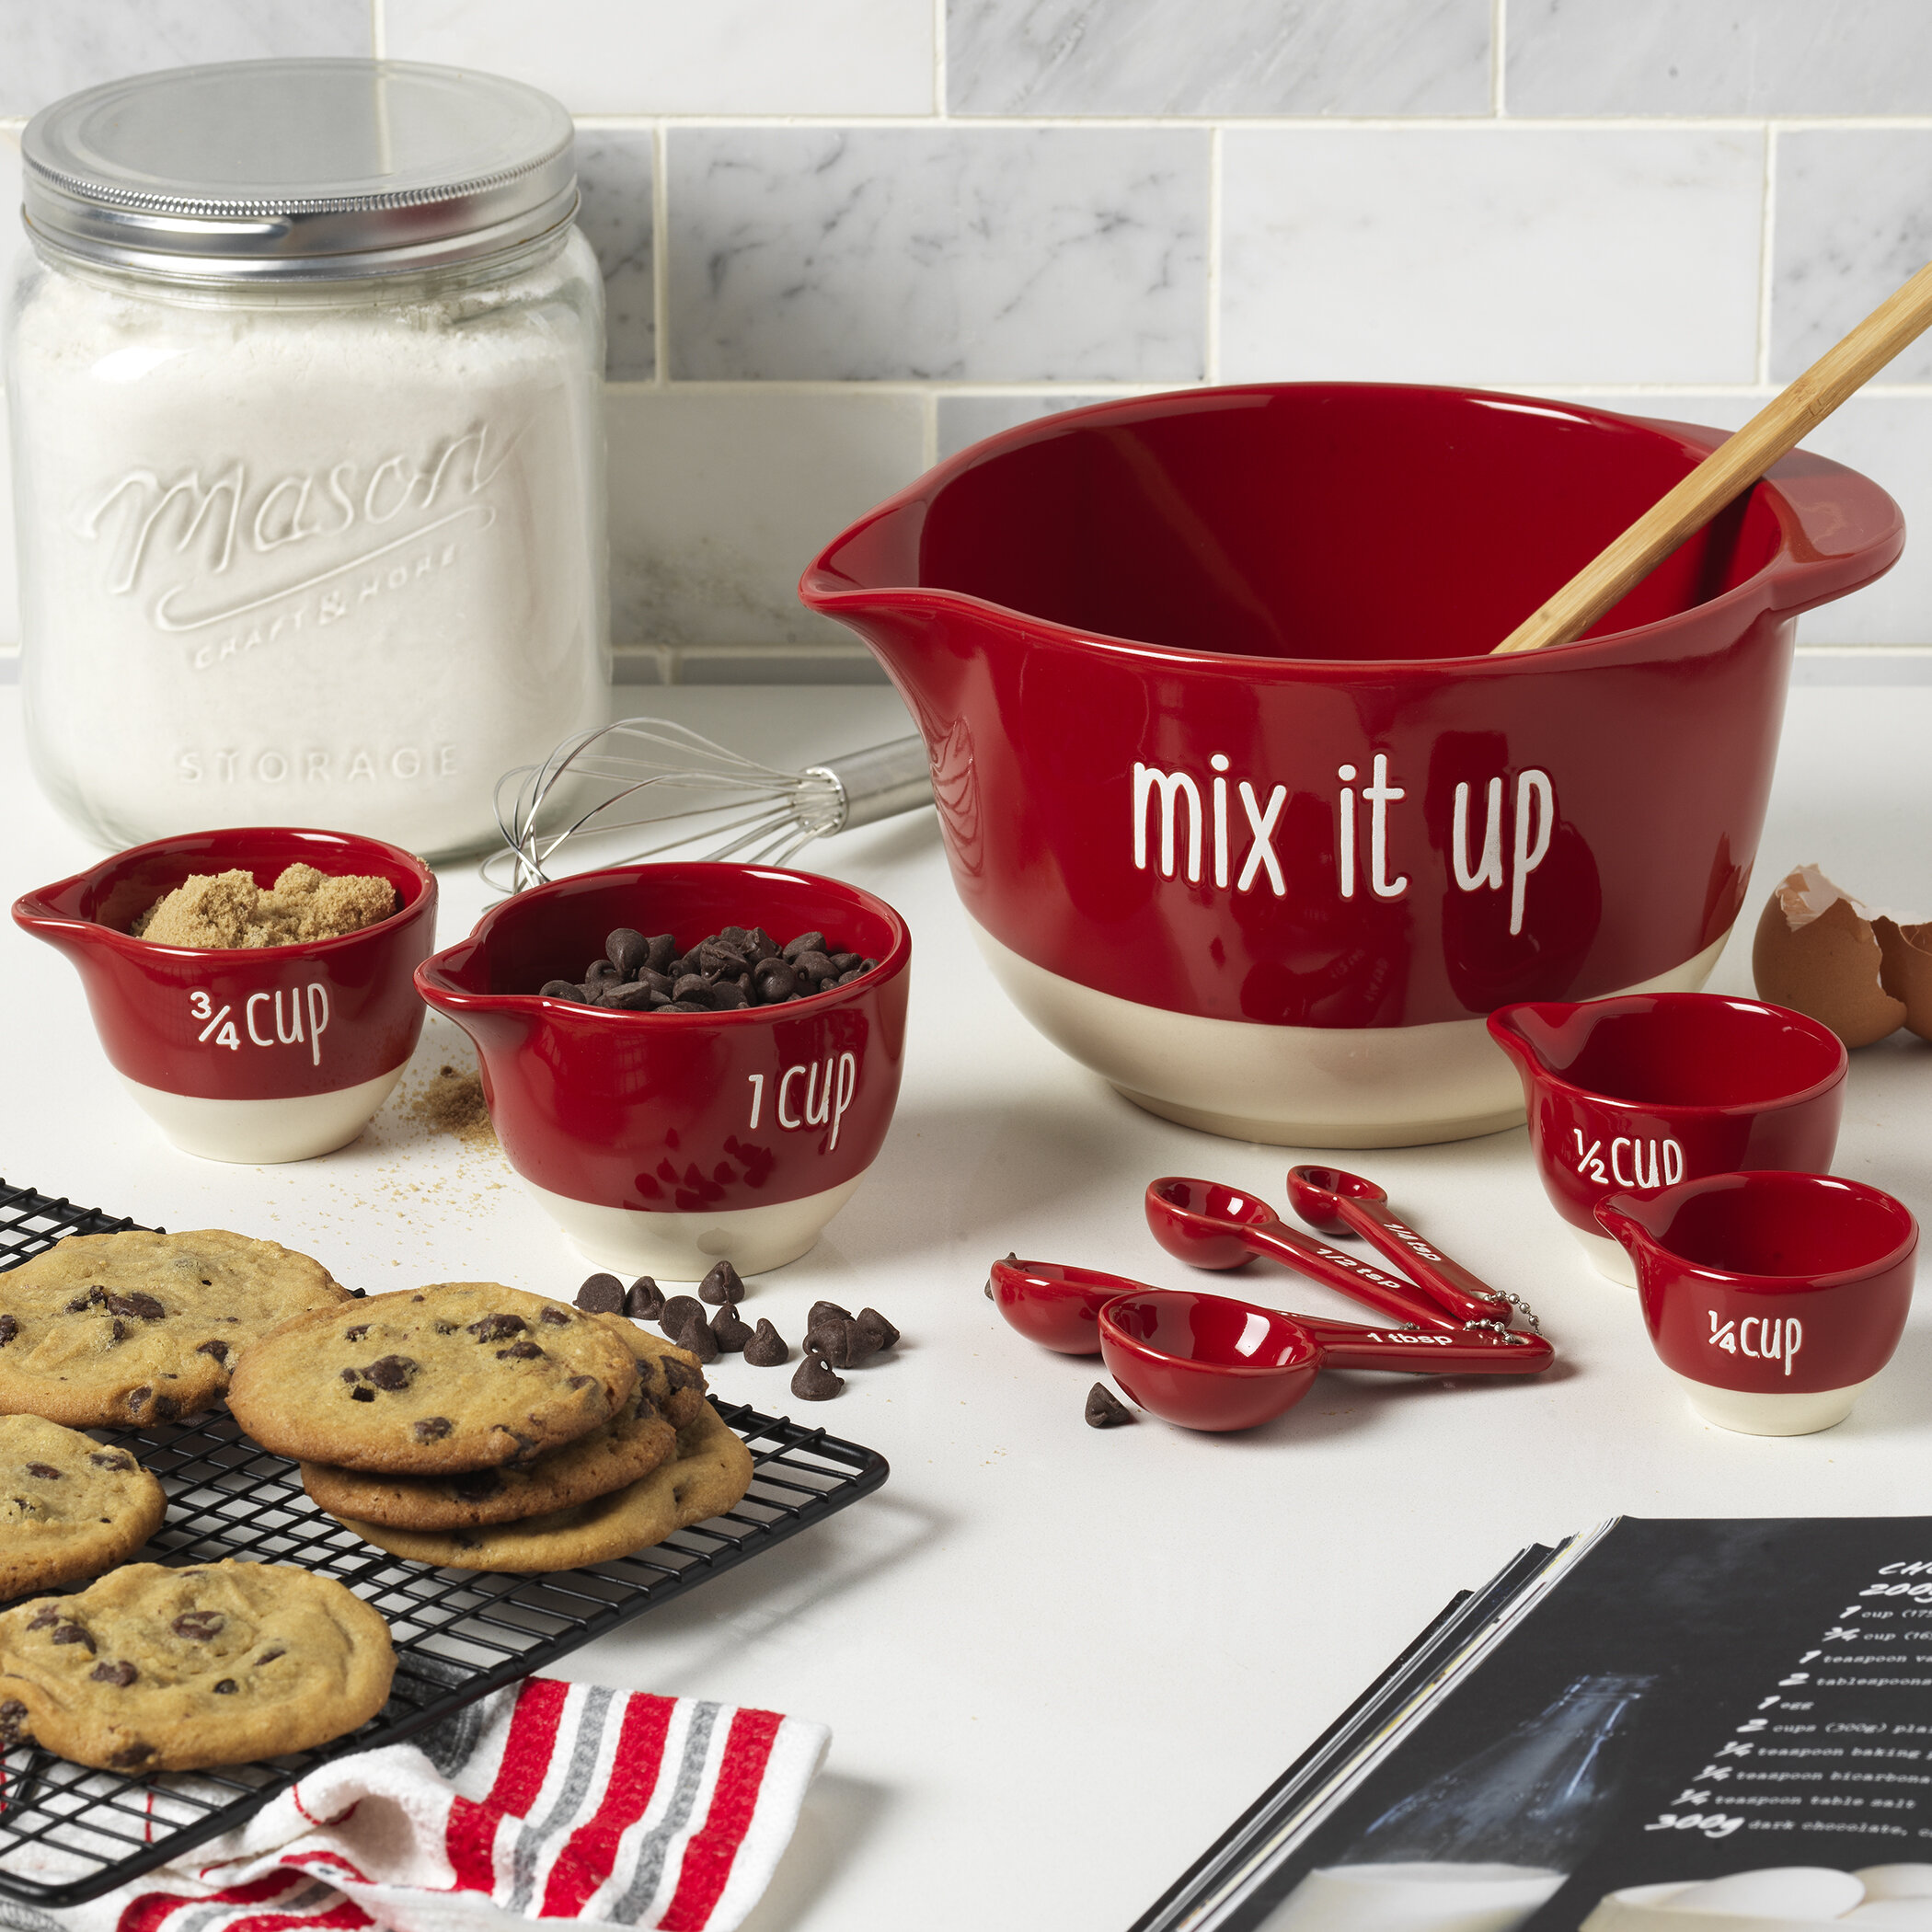 Top Rated Mixing Bowl Sets 